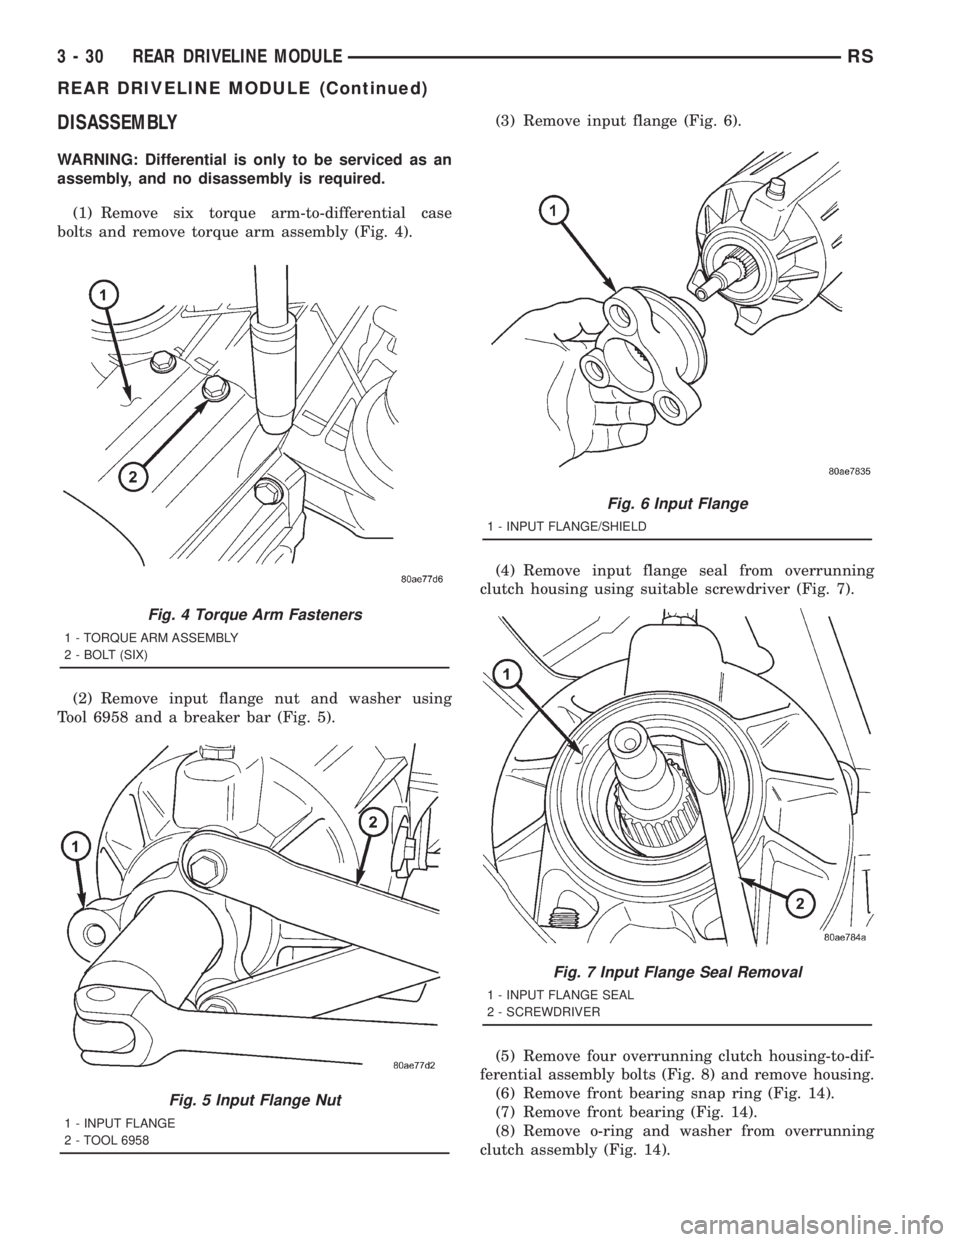 CHRYSLER VOYAGER 2001  Service Manual DISASSEMBLY
WARNING: Differential is only to be serviced as an
assembly, and no disassembly is required.
(1) Remove six torque arm-to-differential case
bolts and remove torque arm assembly (Fig. 4).
(